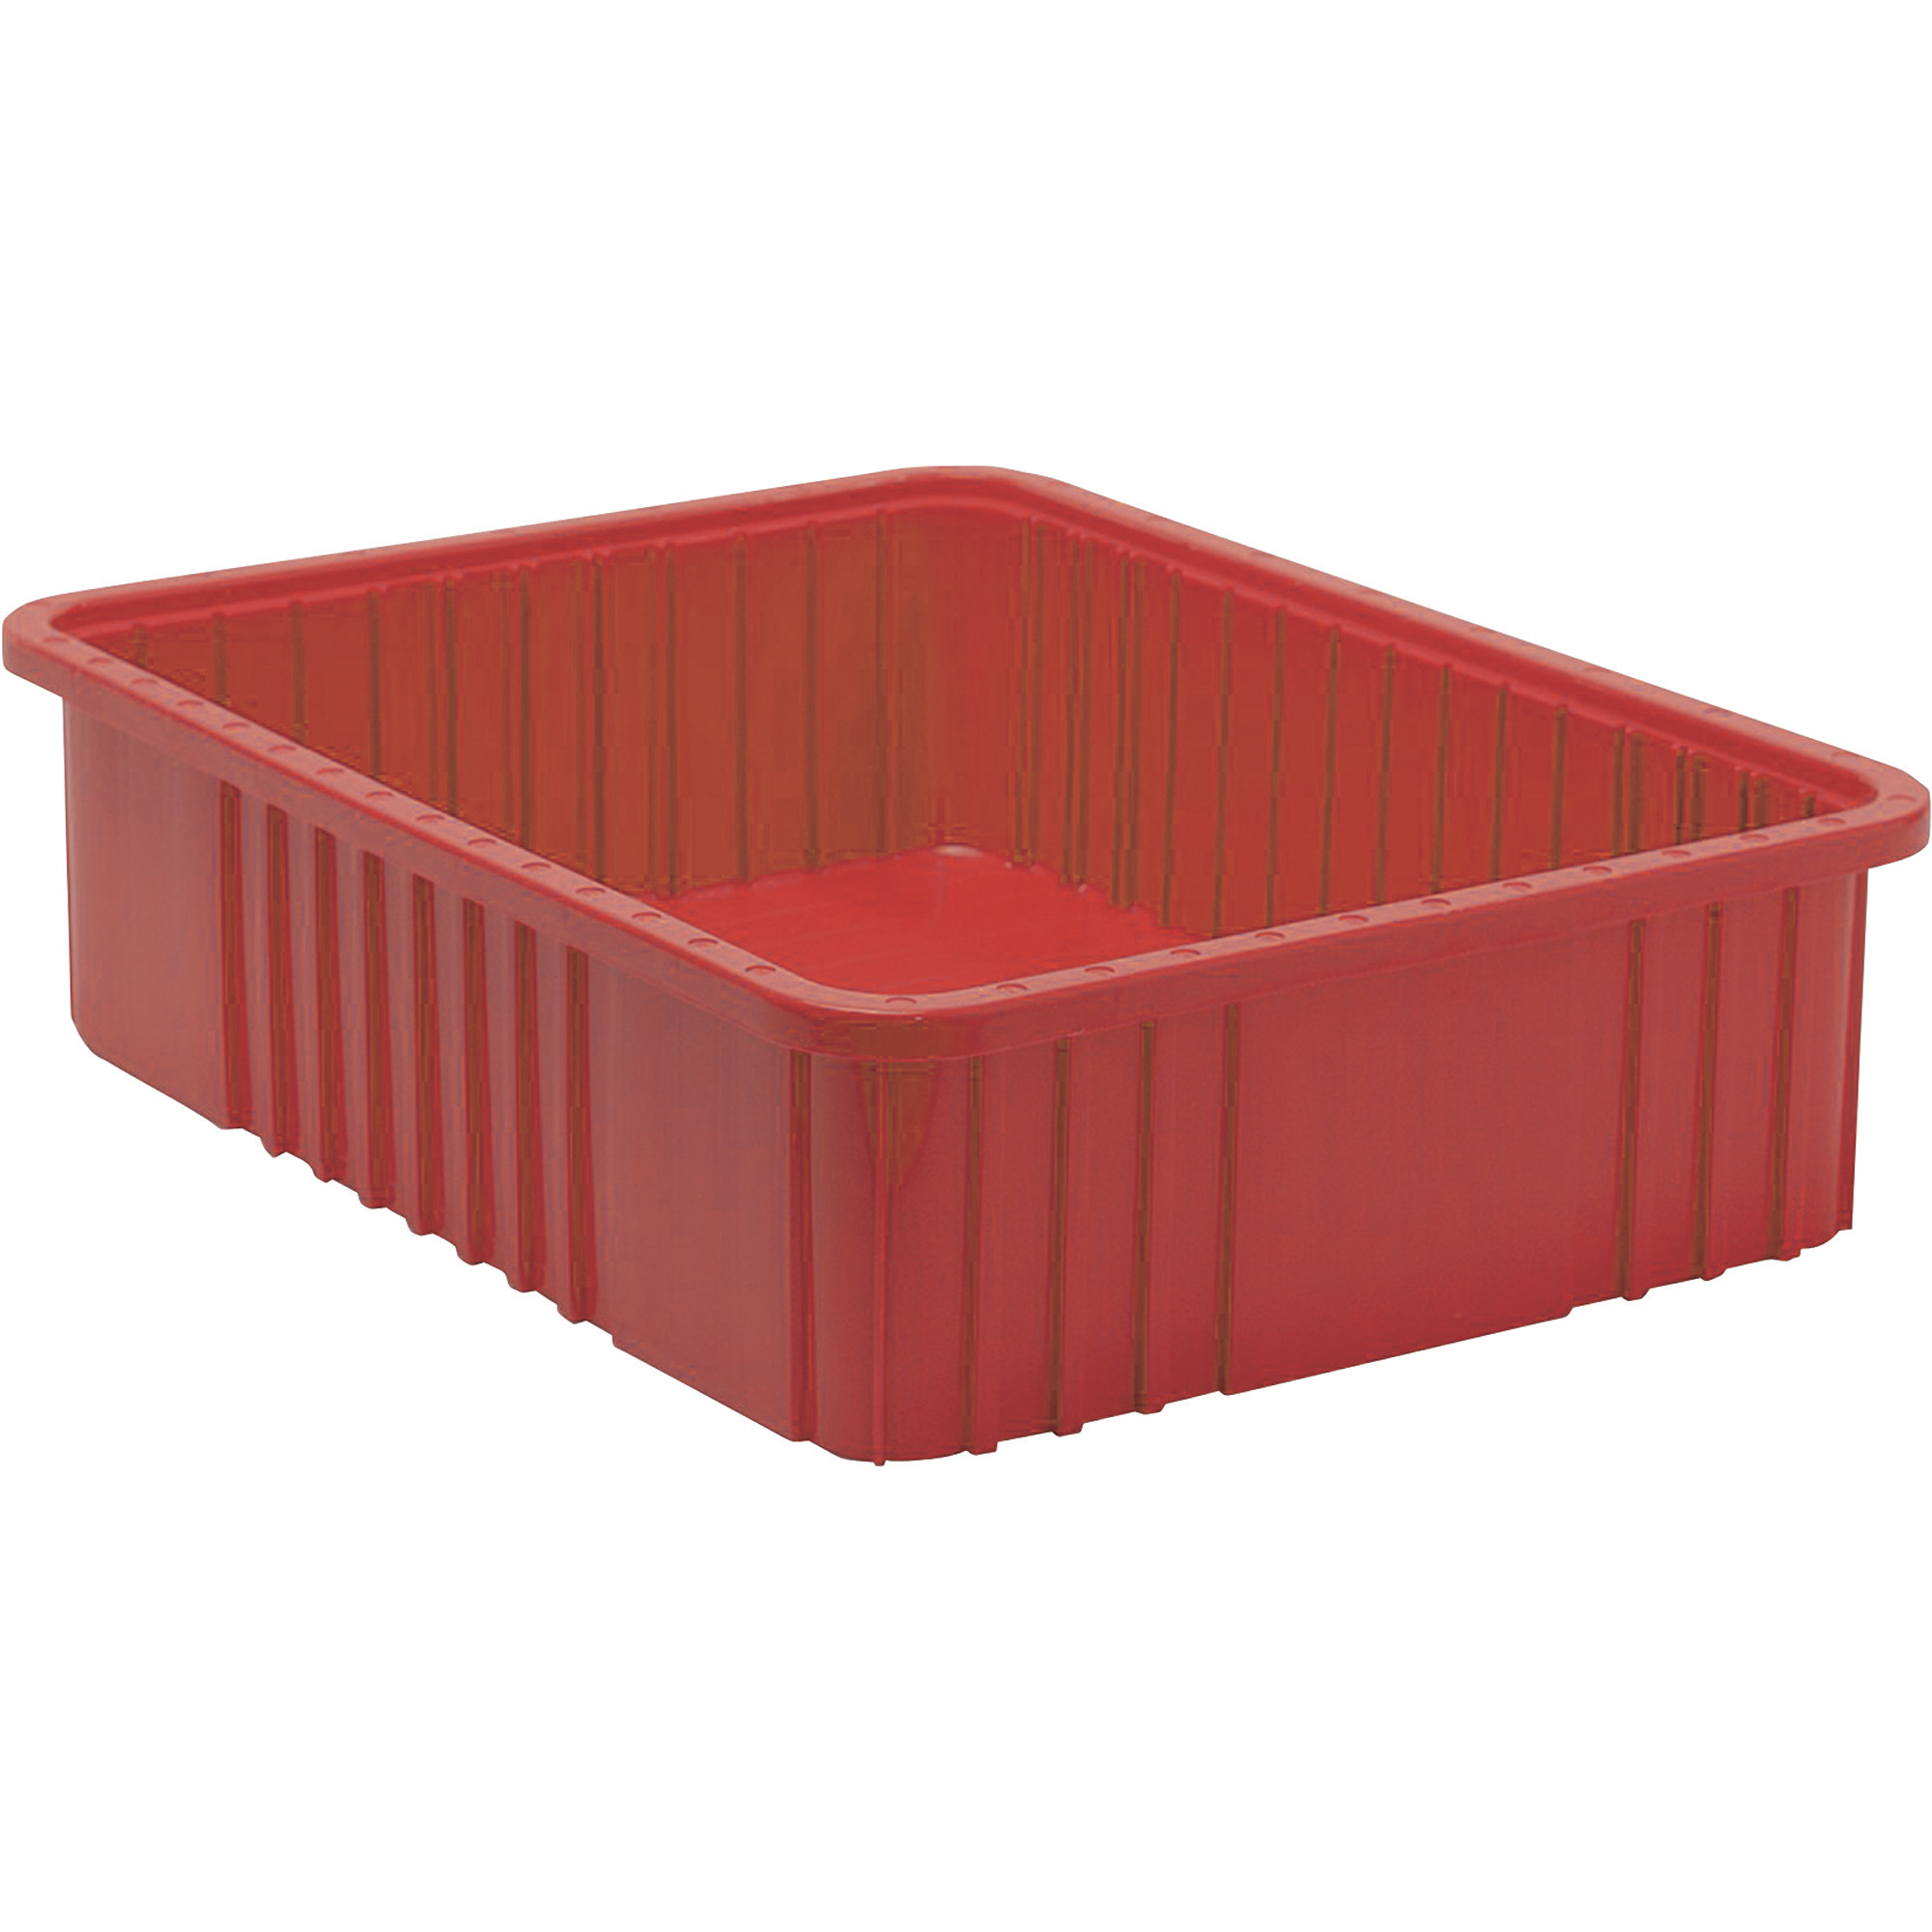 Quantum Storage Dividable Grid Container, 3-Pack, 22 1/2Inch L x 17 1/2Inch W x 6Inch H, Red, Model DG93060RD